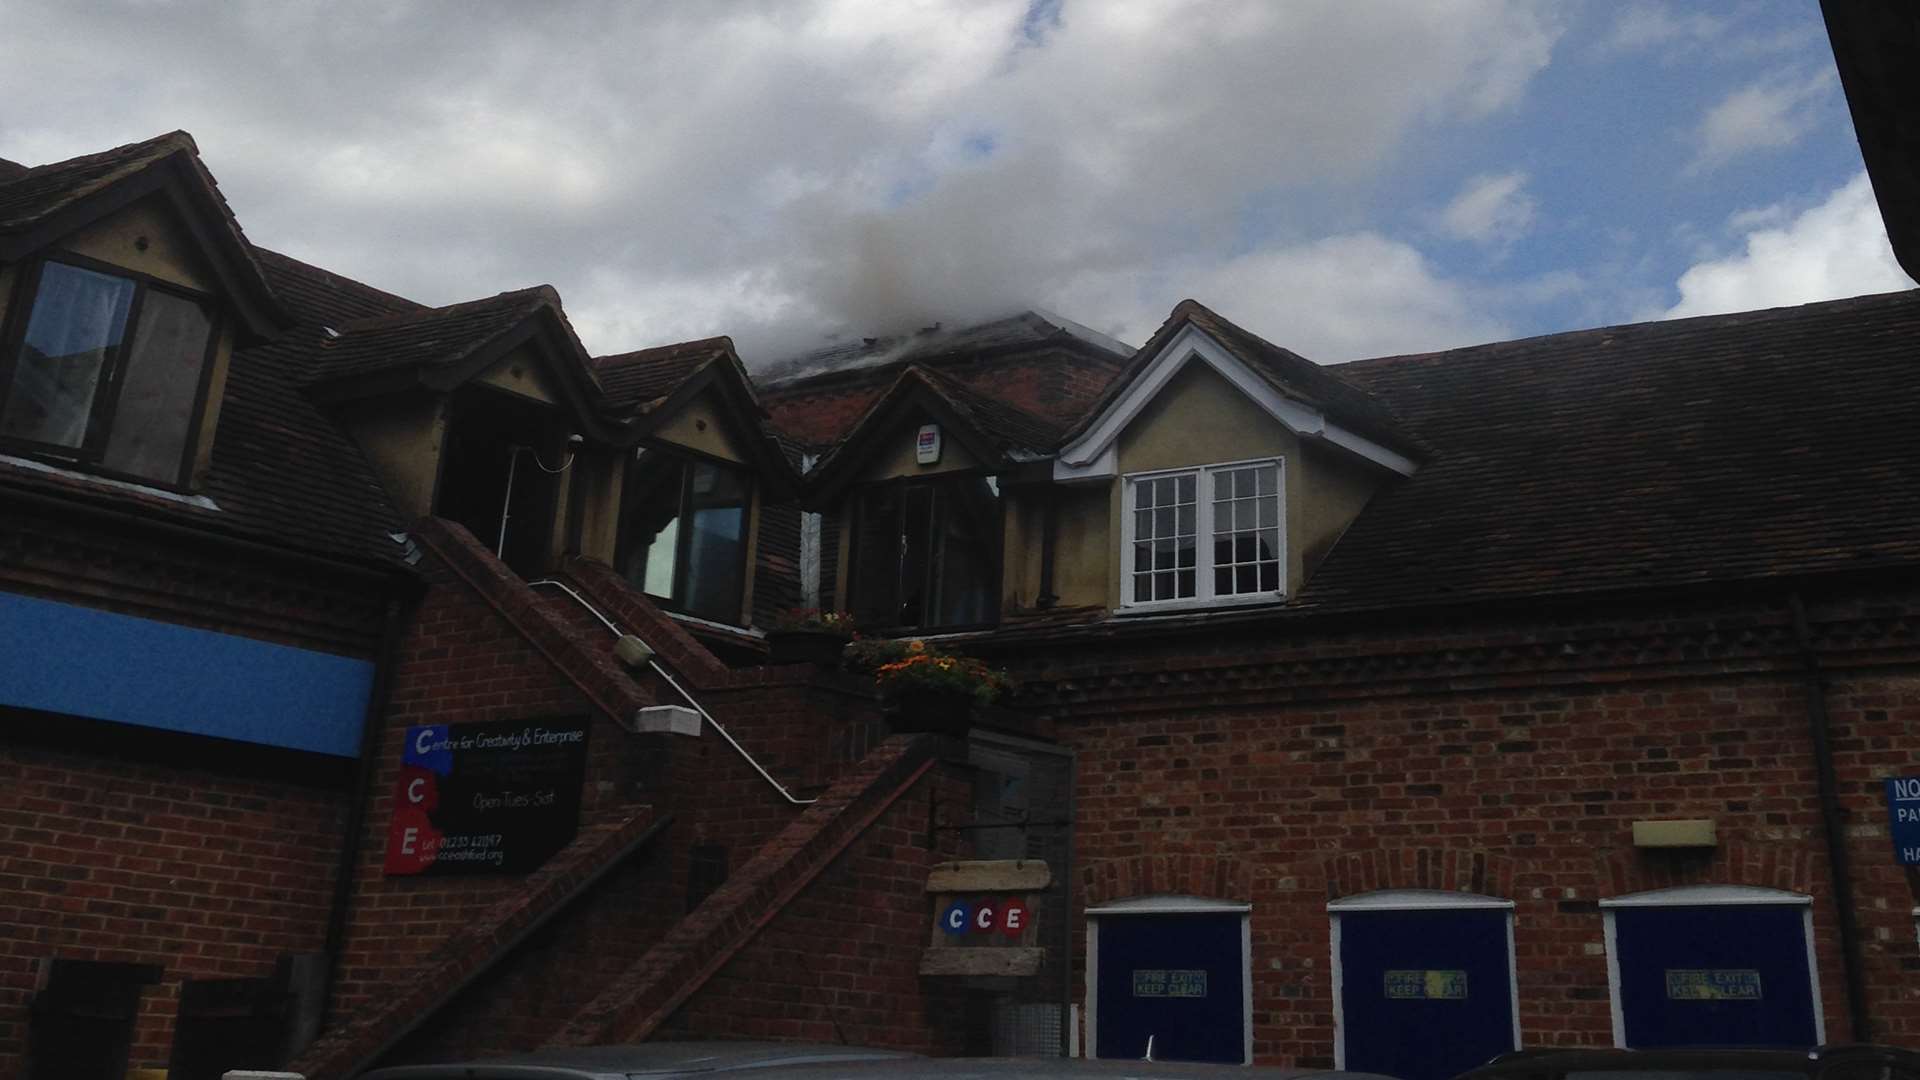 The Auction House Bar in Ashford on fire